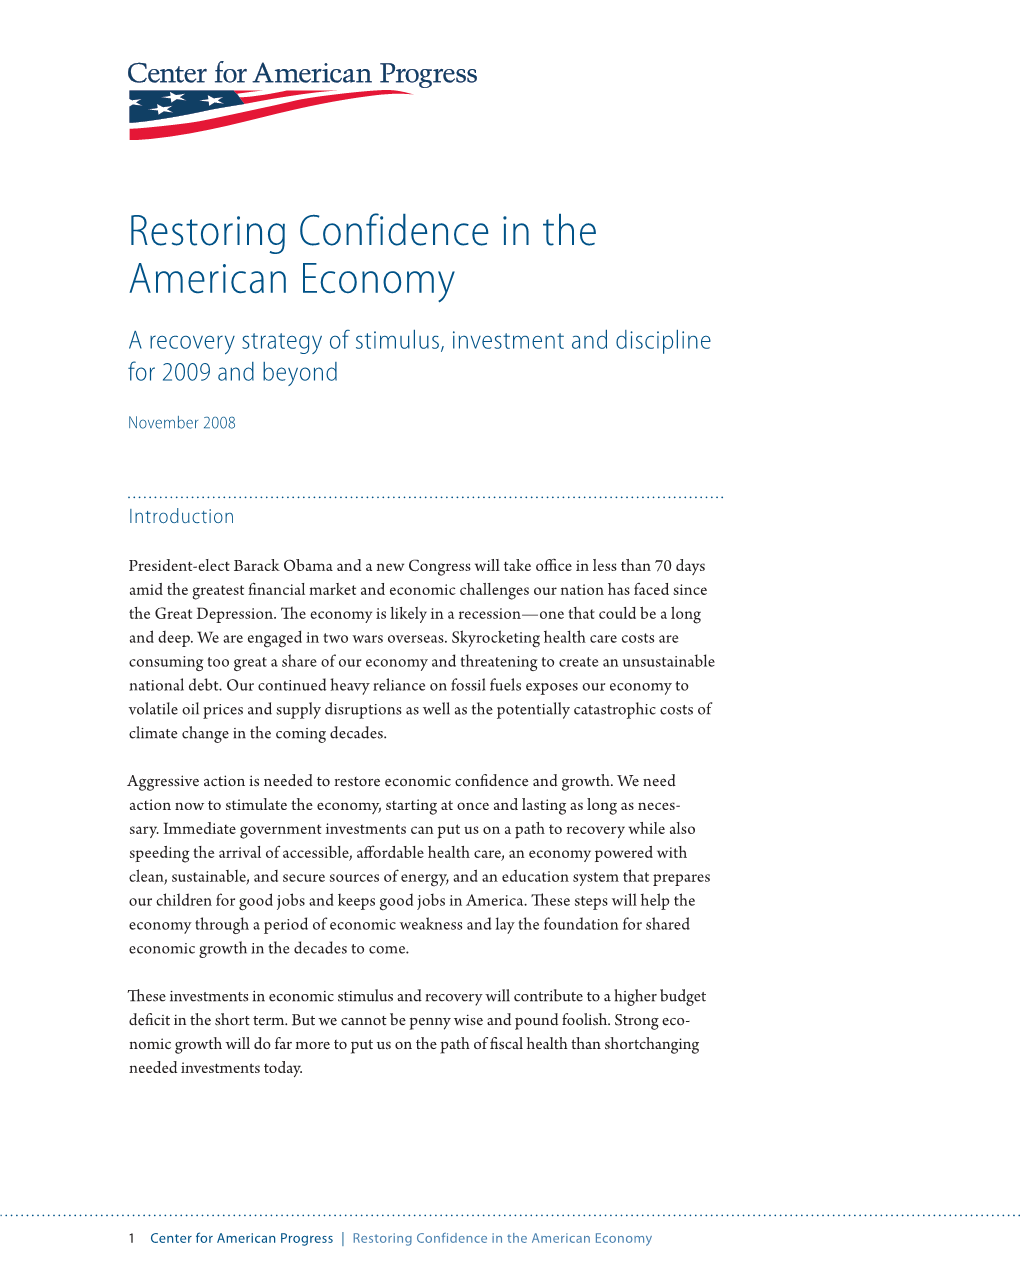 Restoring Confidence in the American Economy a Recovery Strategy of Stimulus, Investment and Discipline for 2009 and Beyond